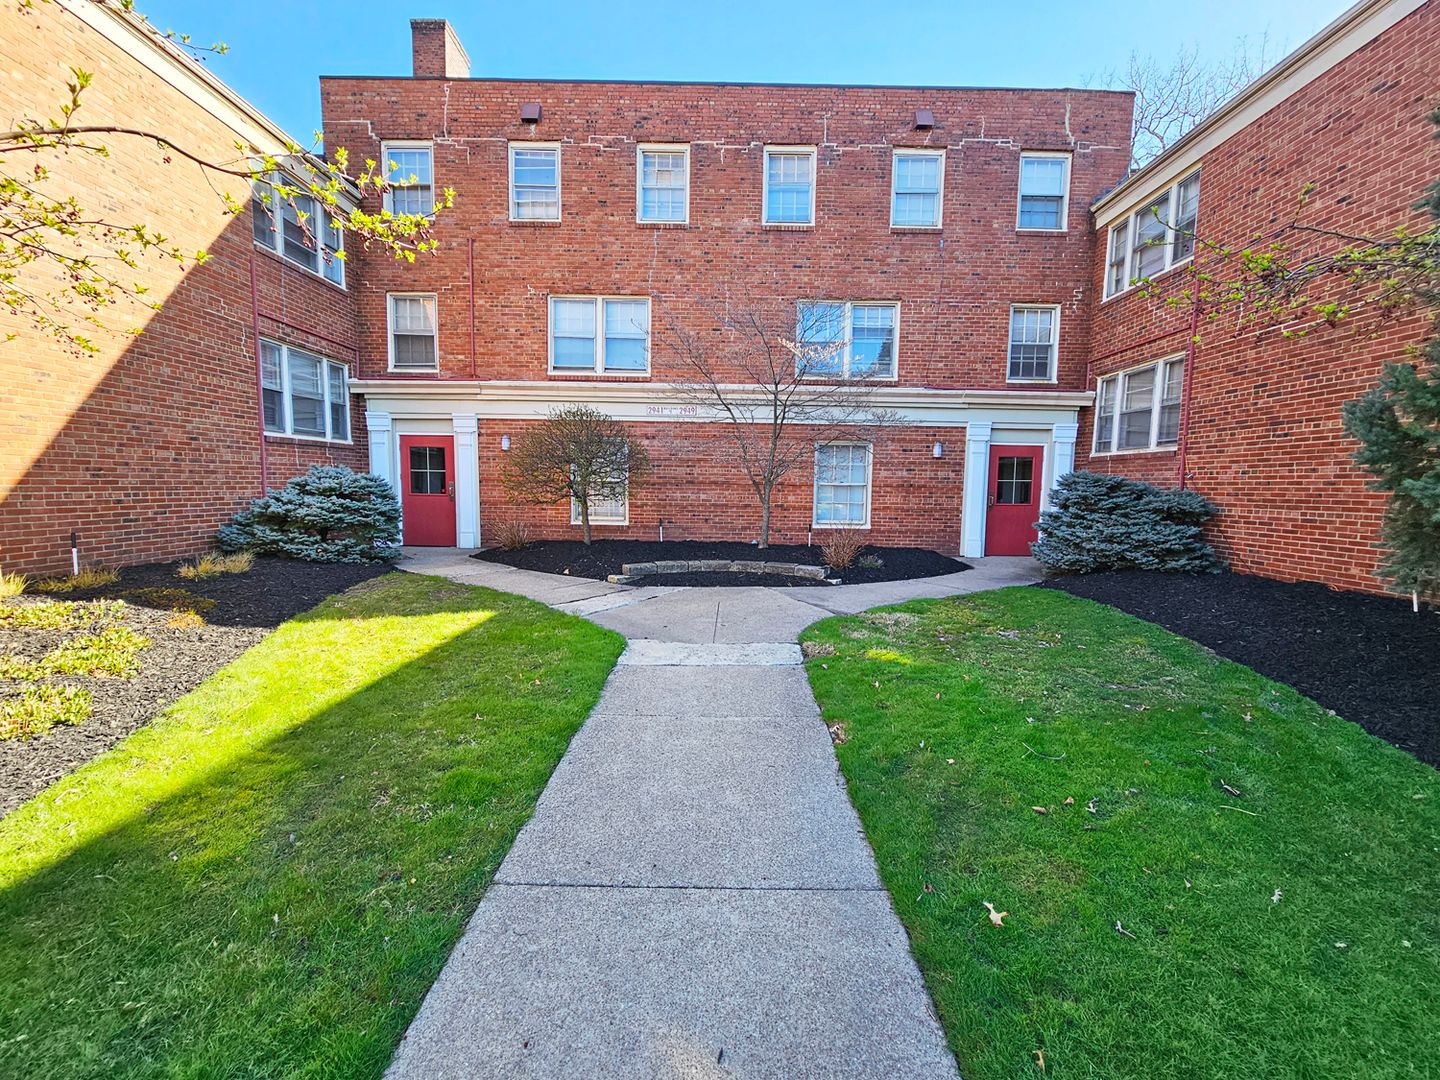 1 Bed and 1 Bath Apartments for Rent in Shaker Heights | Newly Renovated Image